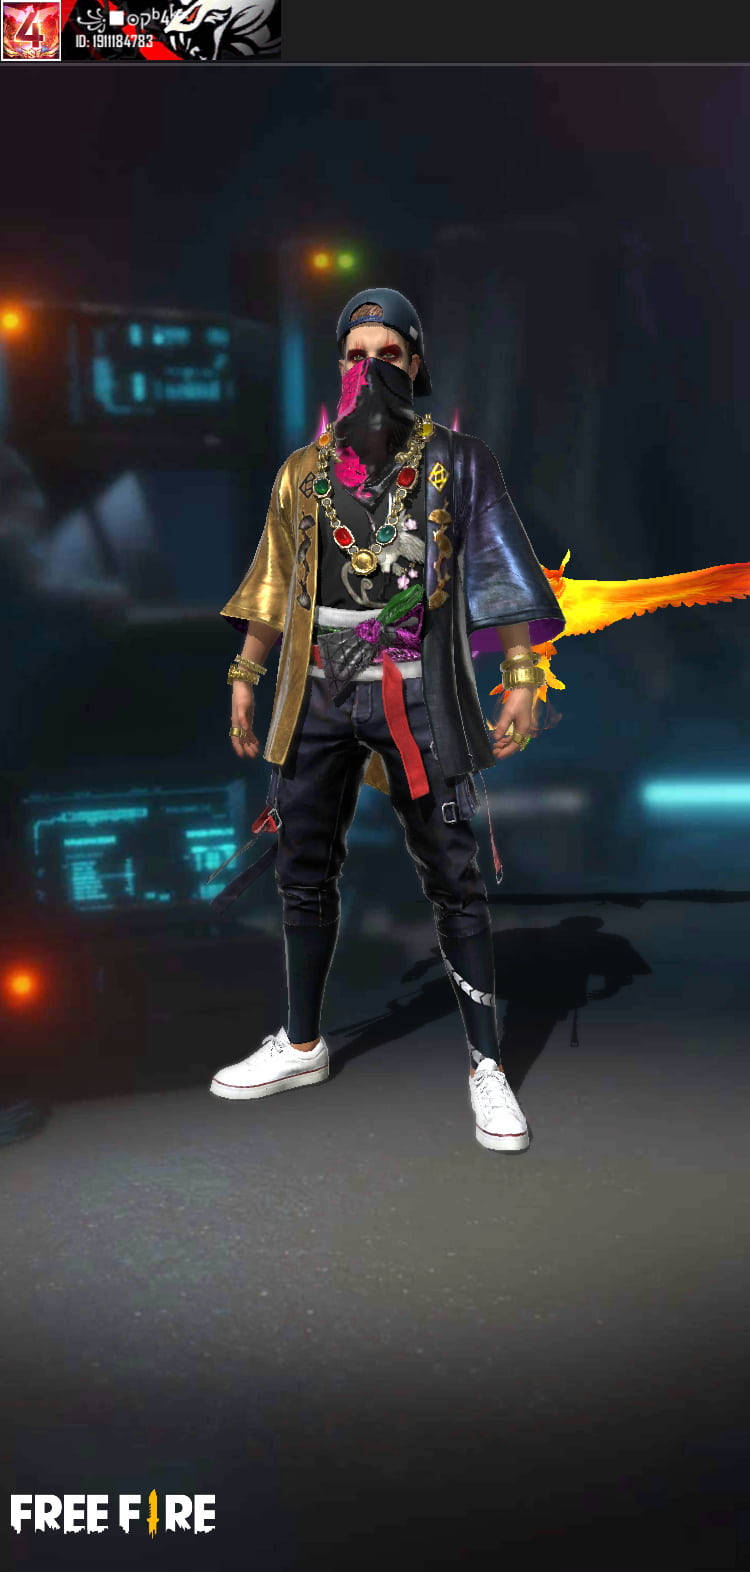 Free Fire Dj Alok Japanese Aesthetic Outfit Wallpaper